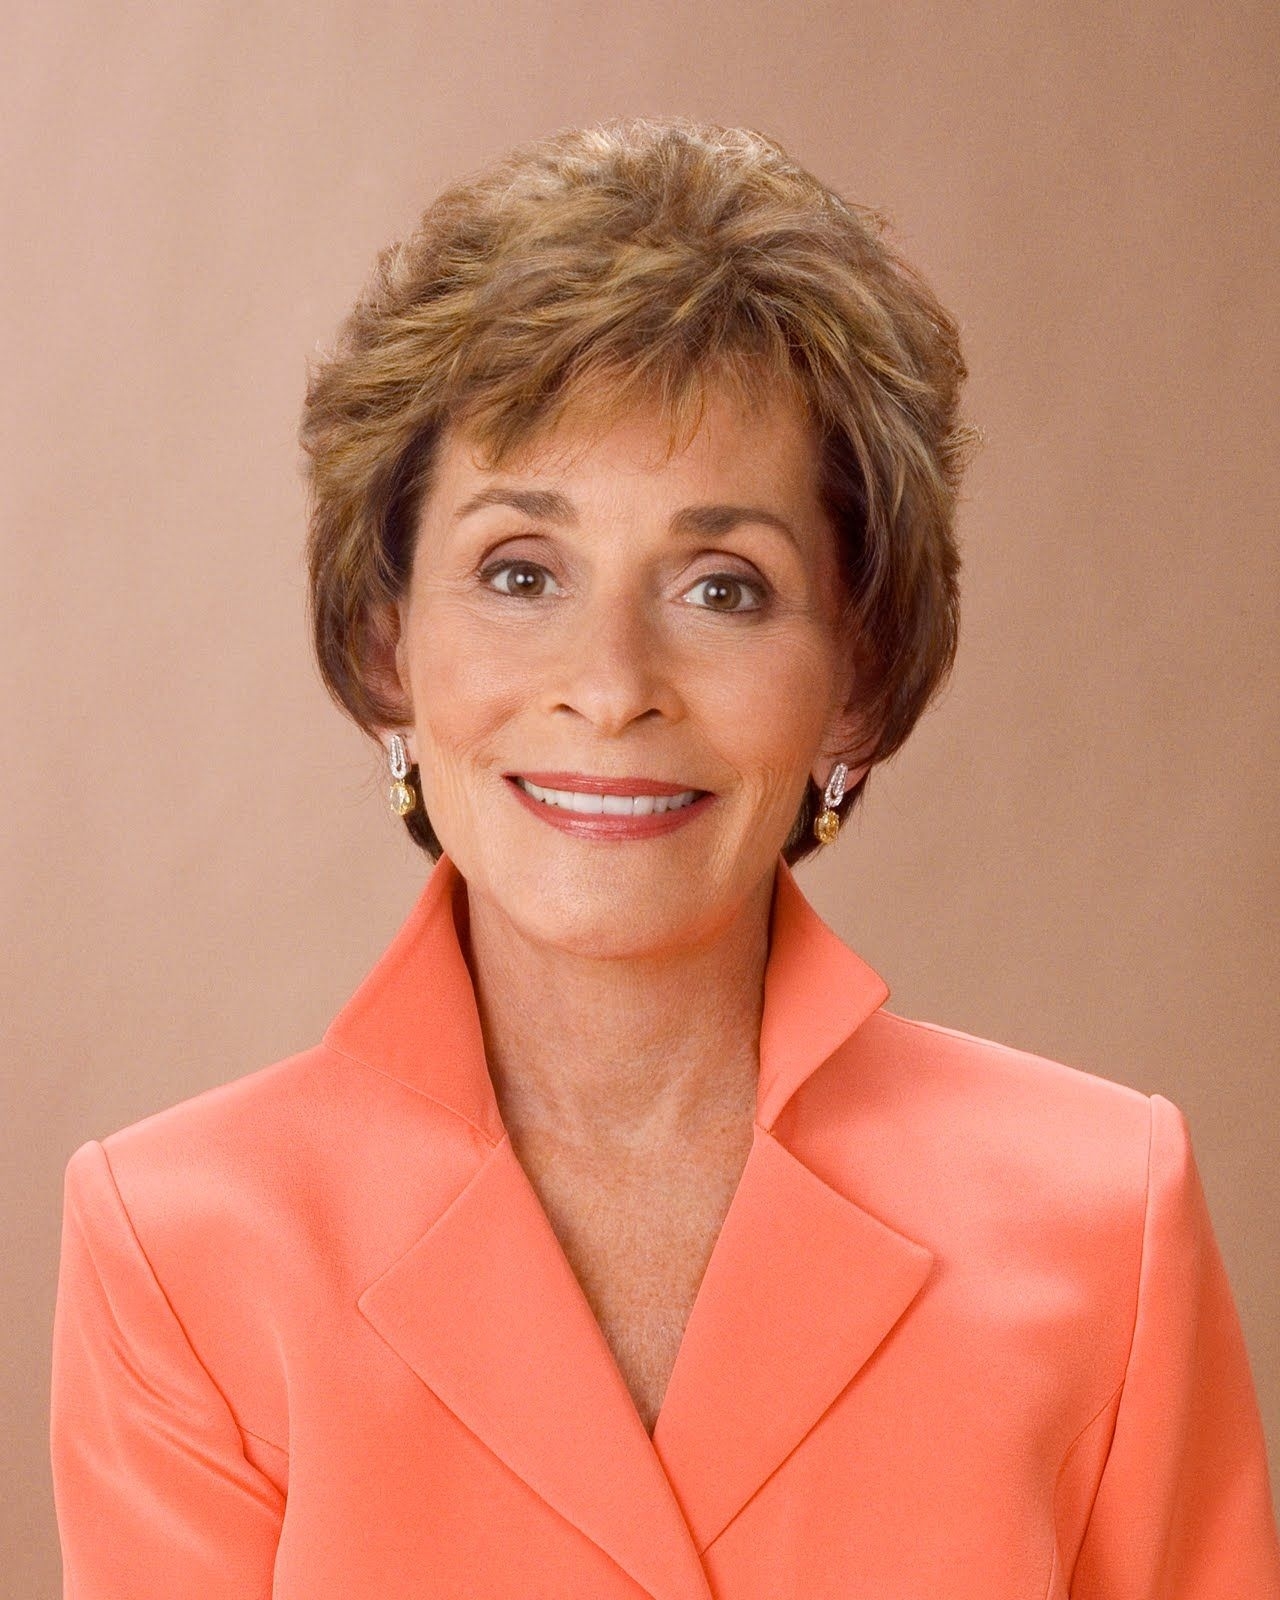 Judith Sheindlin (Judge Judy) She Makes Too Much Money for Judge Judy And Hair Change